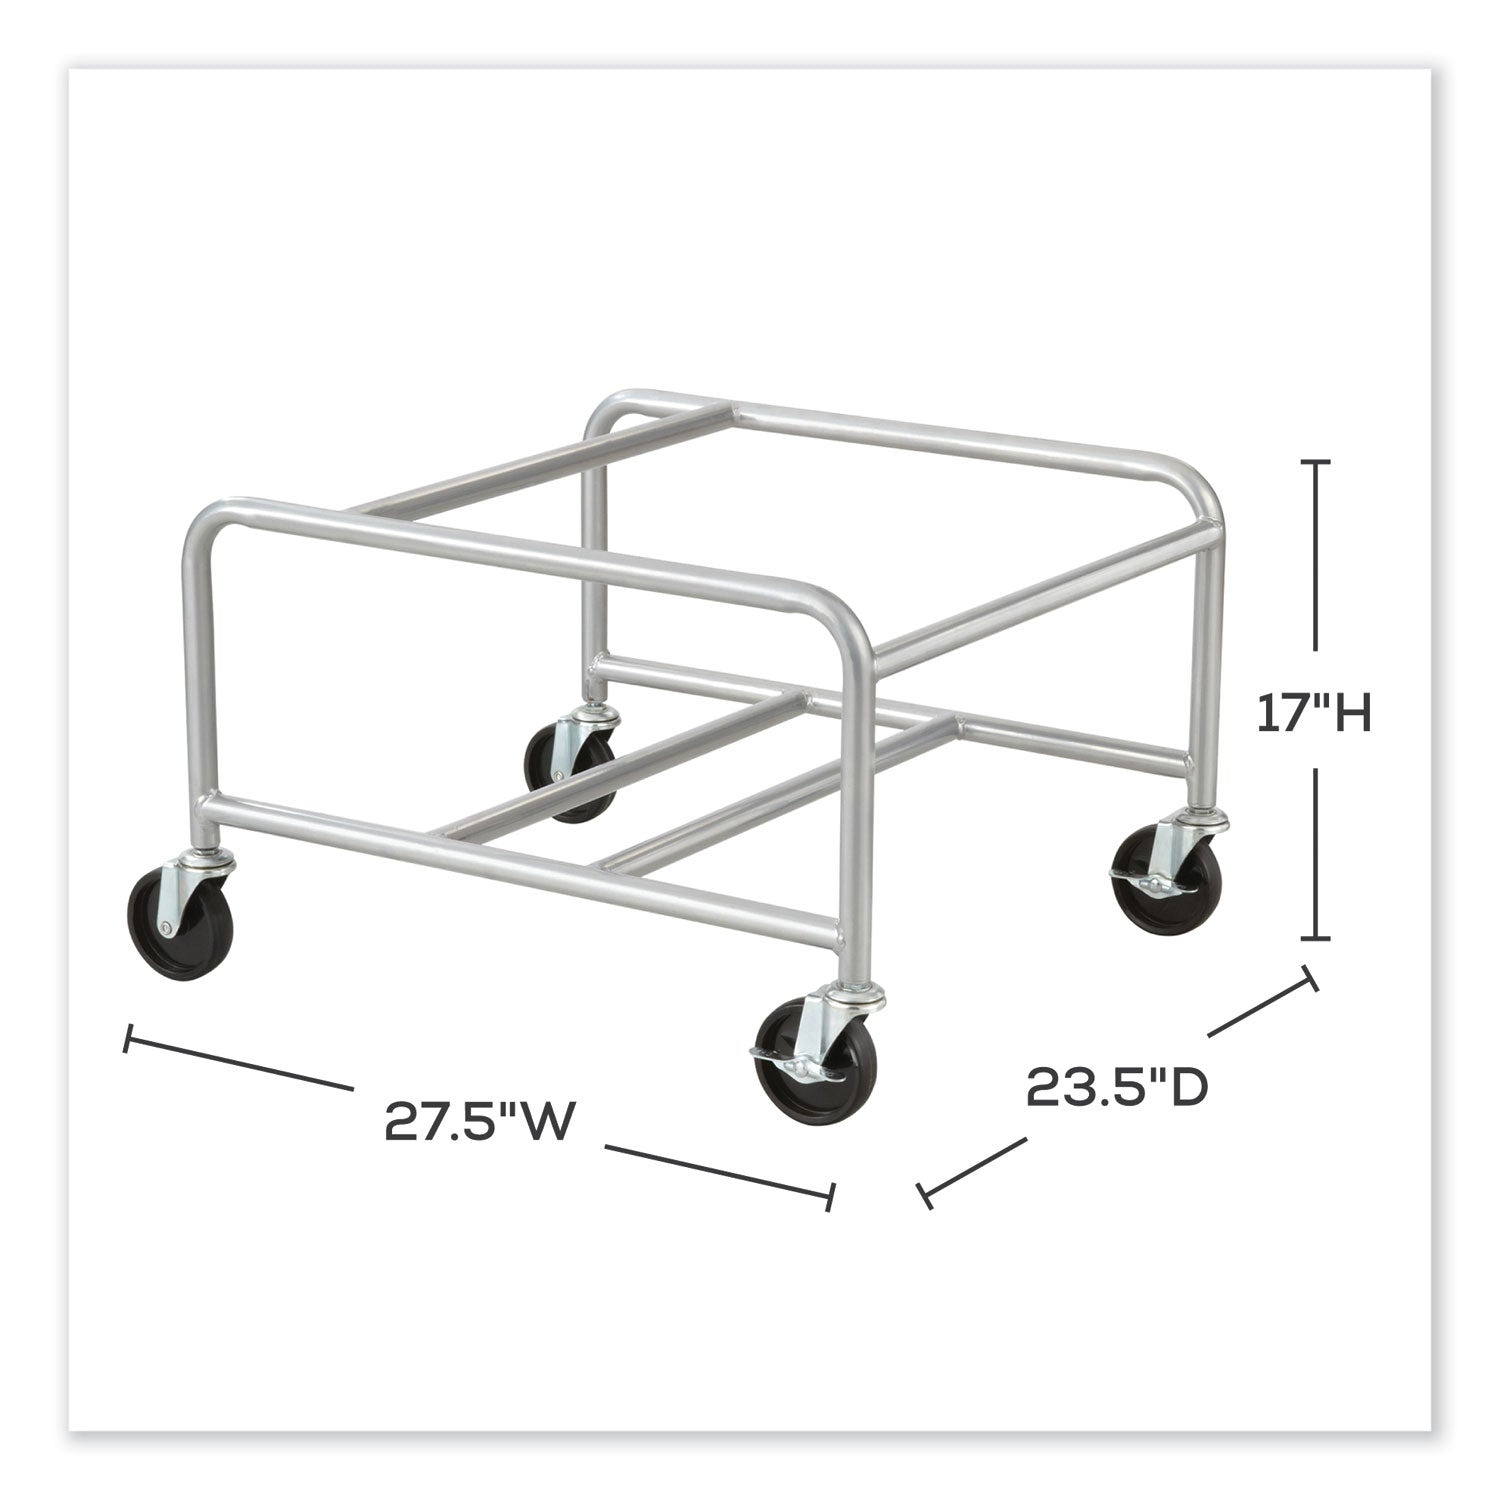 sled-base-stack-chair-cart-metal-500-lb-capacity-235-x-275-x-17-silver-ships-in-1-3-business-days_saf4190sl - 4